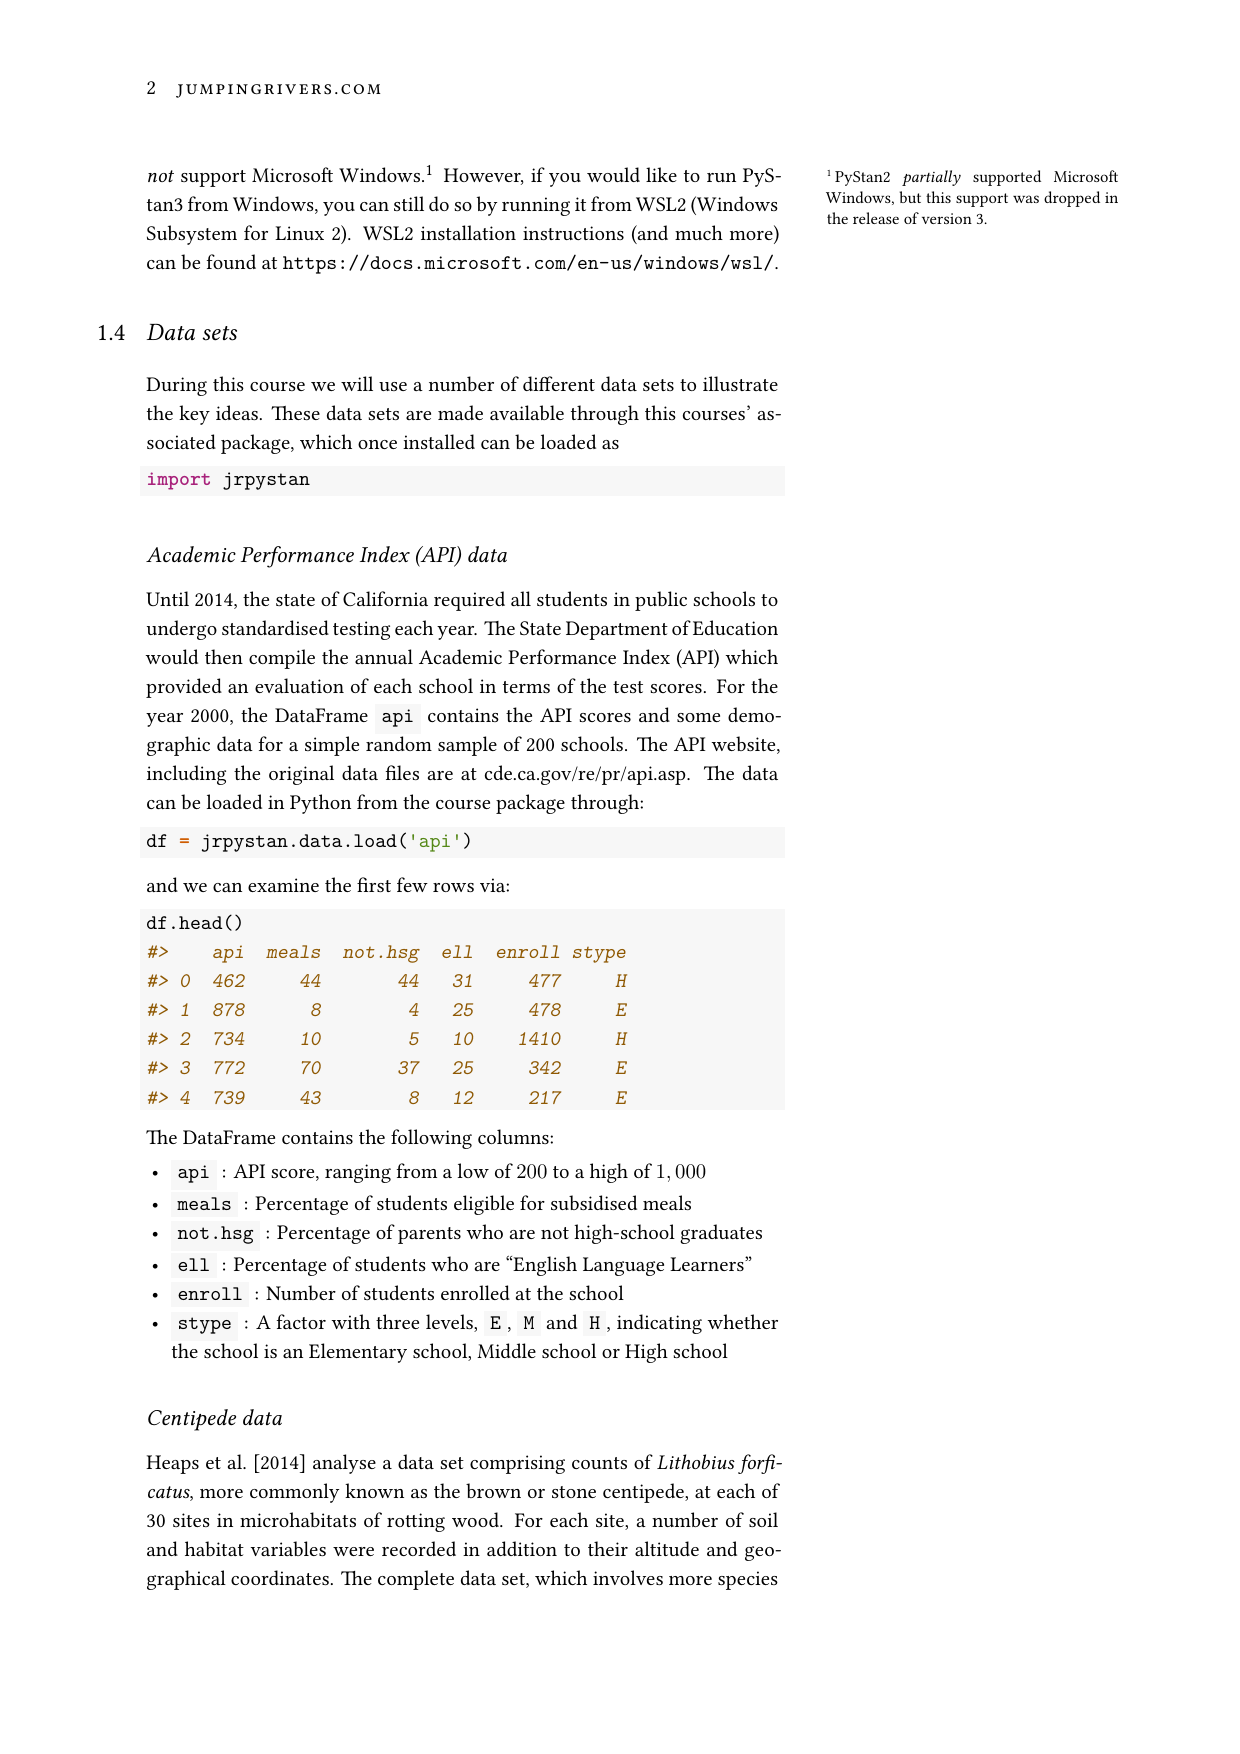 Example course material for 'Introduction to Bayesian Inference using PyStan'